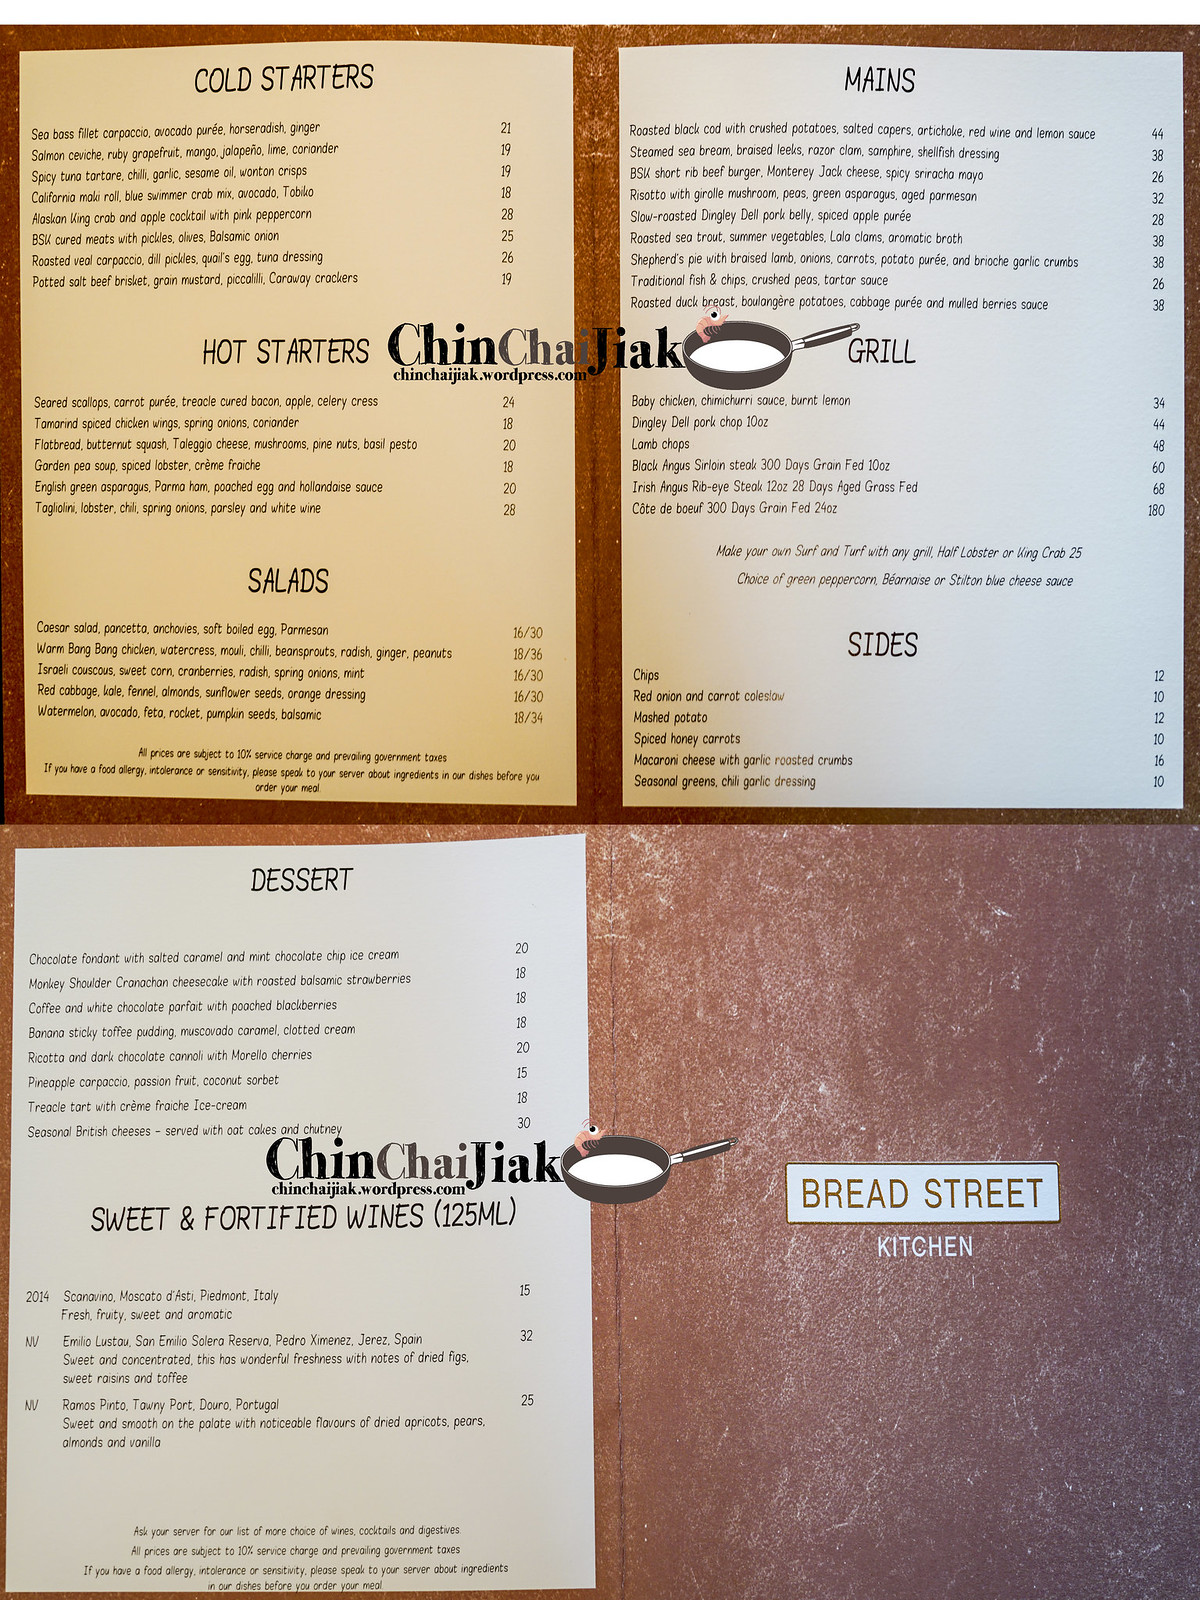 Bread Street Kitchen By Gordon Ramsay At MBS With Menu Chin